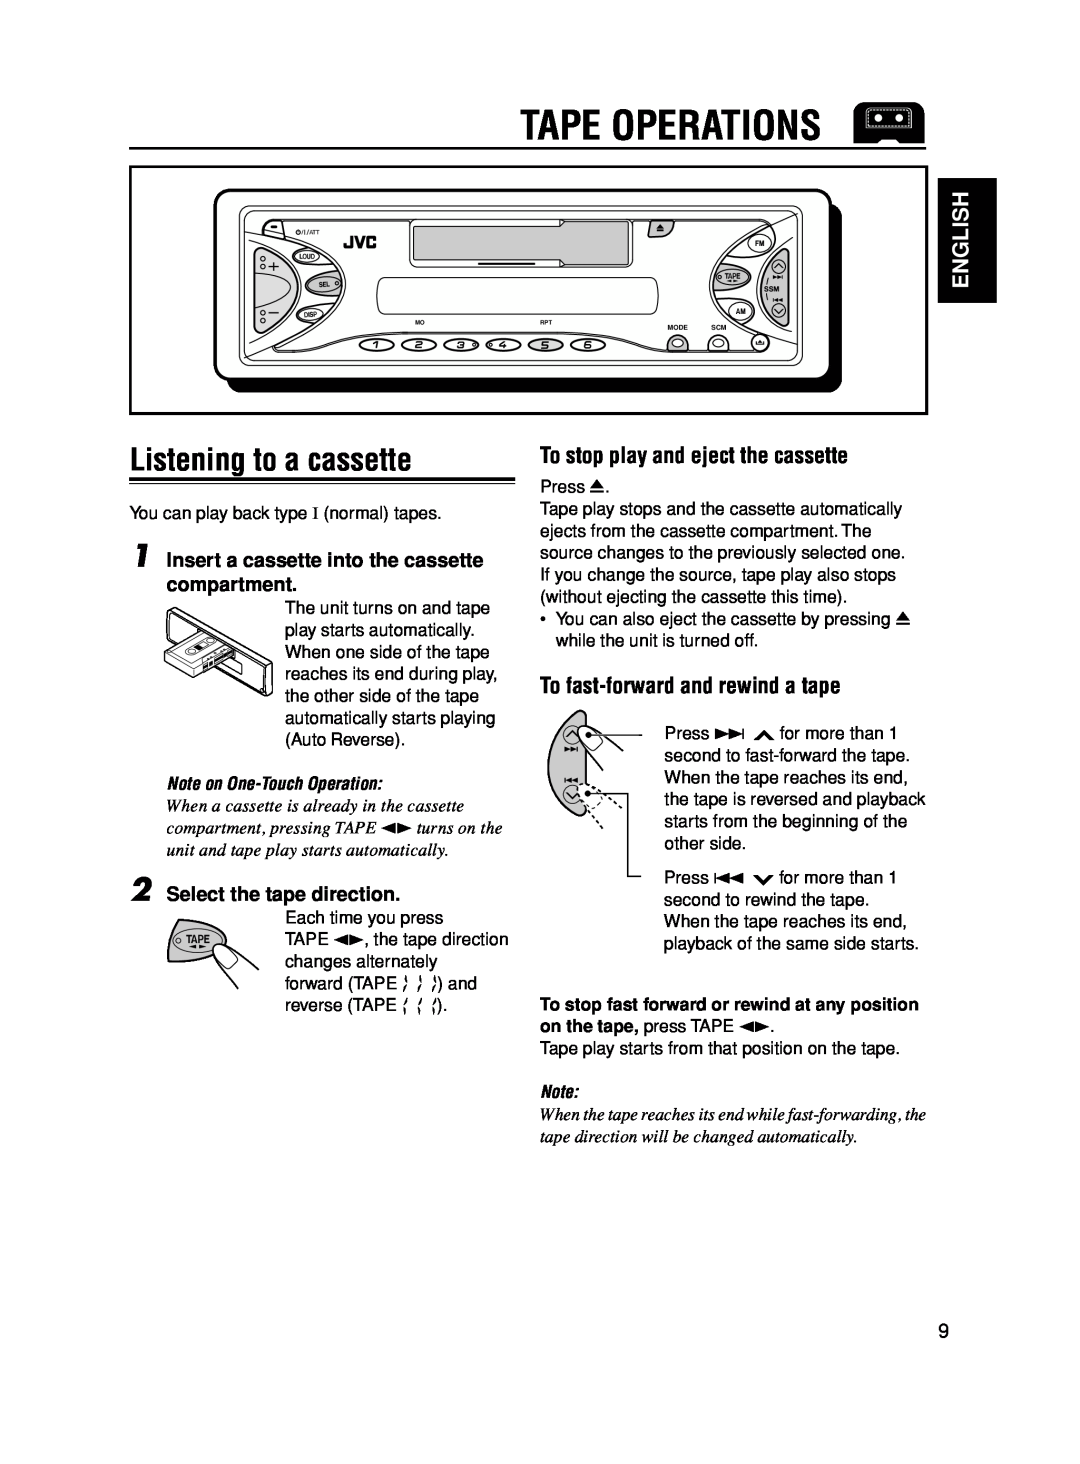 JVC KS-F545 manual Tape Operations, Listening to a cassette, To stop play and eject the cassette, English 